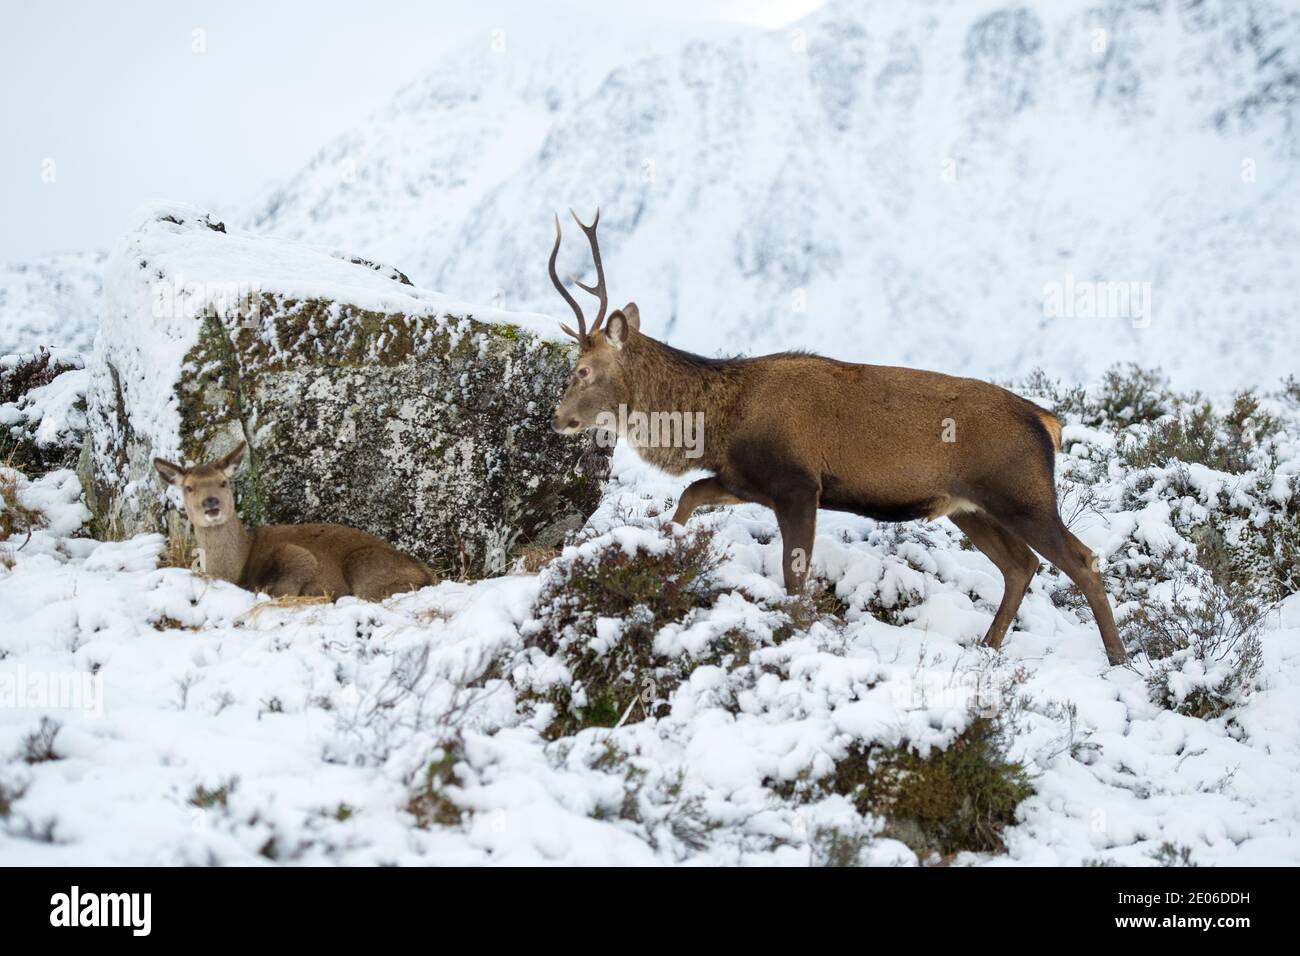 Glencoe, Scotland, UK. 30th Dec, 2020. Pictured: Stag in Glencoe with the famous mountain Buachaille Etive Mòr as a backdrop. Since Scotland was put into phase 4 lockdown, people have been coming out to feed the deer which roam wild in the glen, tempting the herd of deer down from the higher ground. Credit: Colin Fisher/Alamy Live News Stock Photo